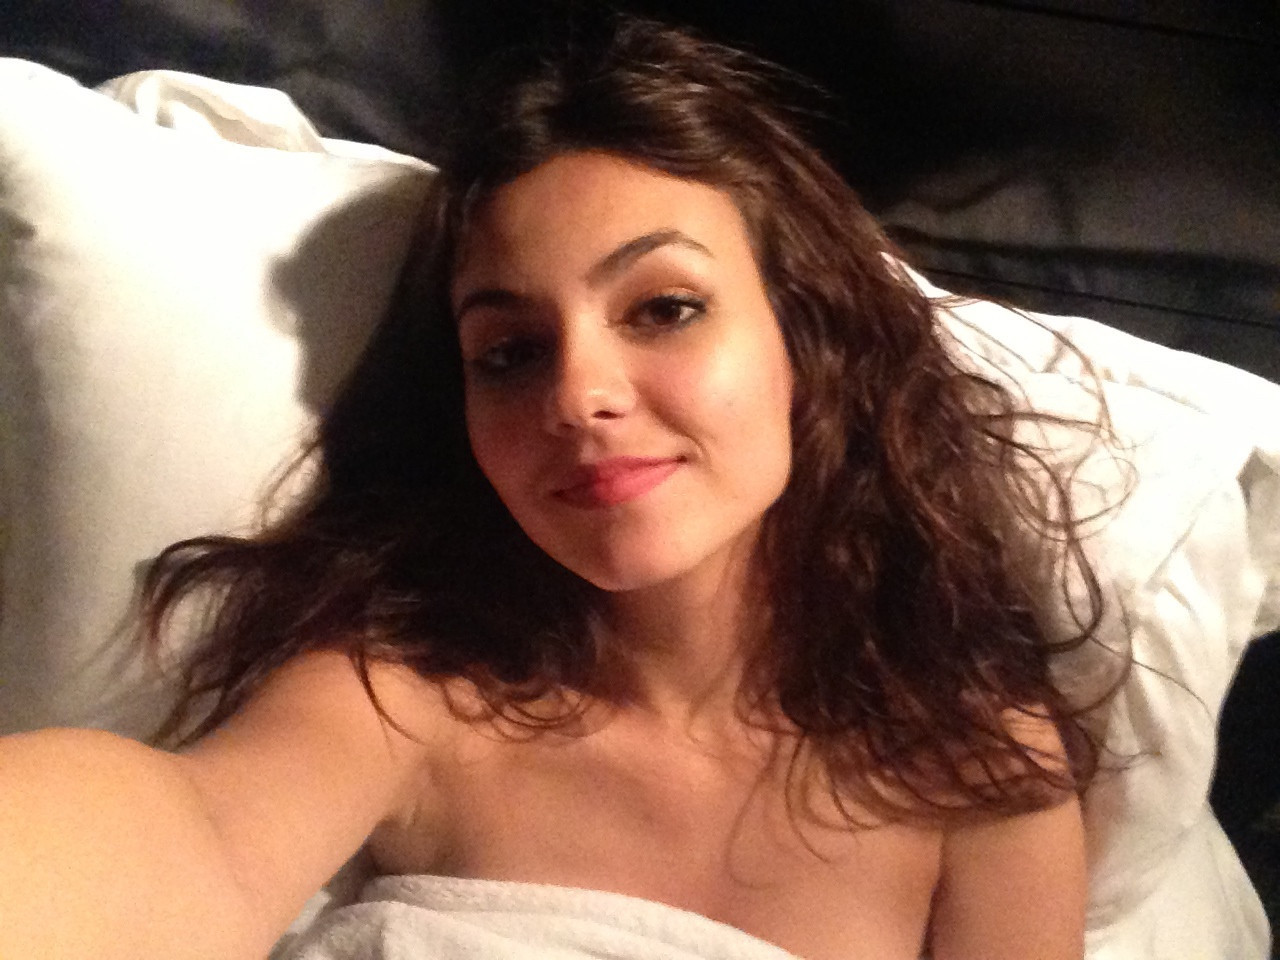 Victoria-Justice-Naked-028c2bbe3c82be796d.jpg